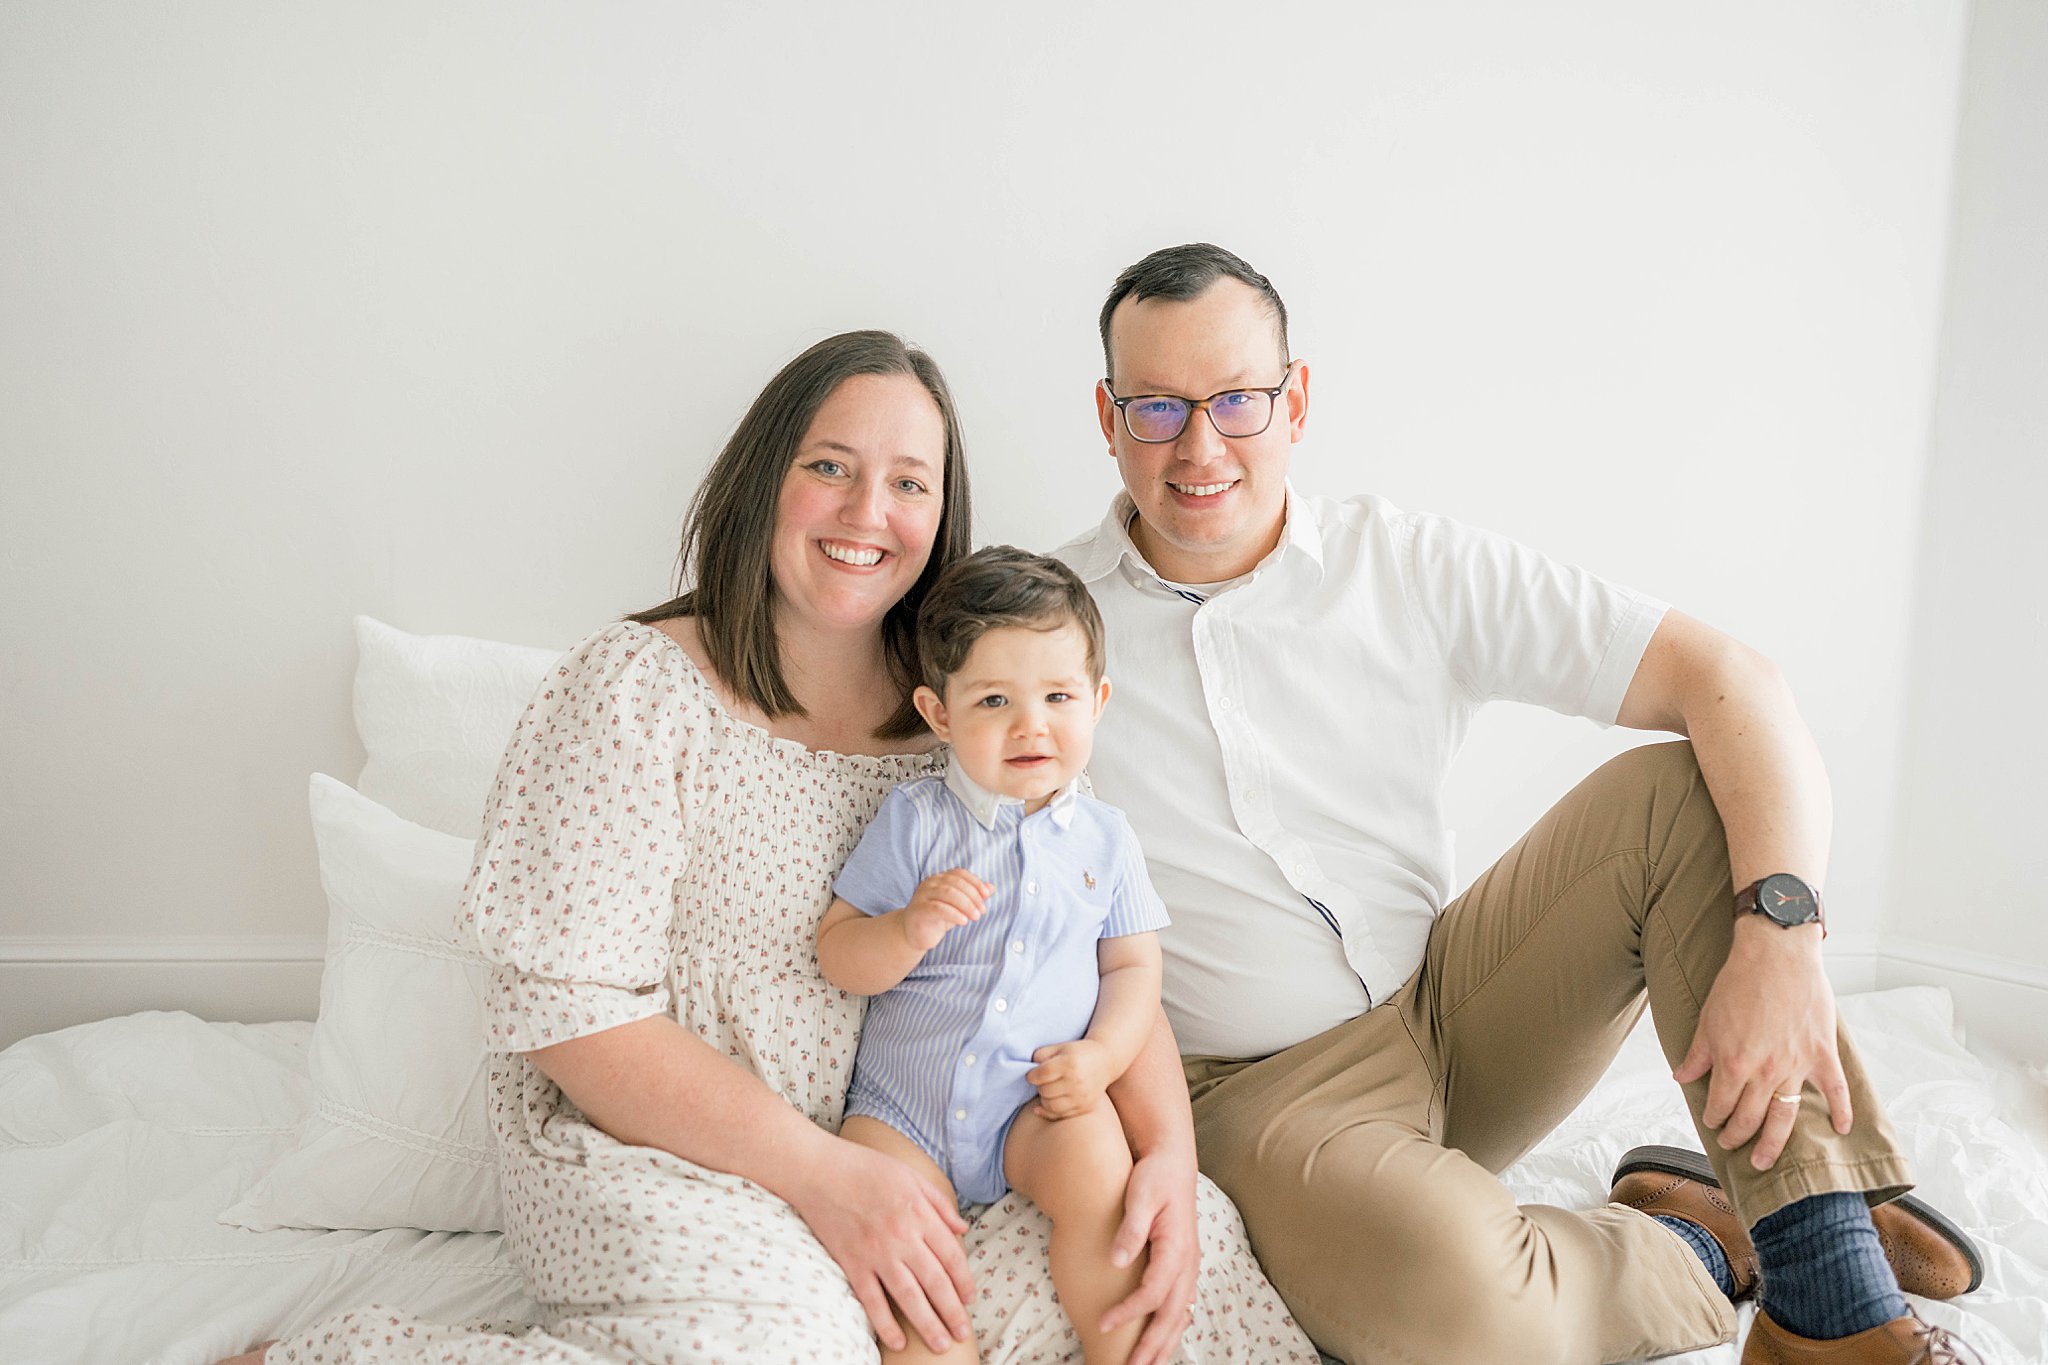 Mom and dad sit on a white bed while their toddler son in a blue onesie sits on mom's lap